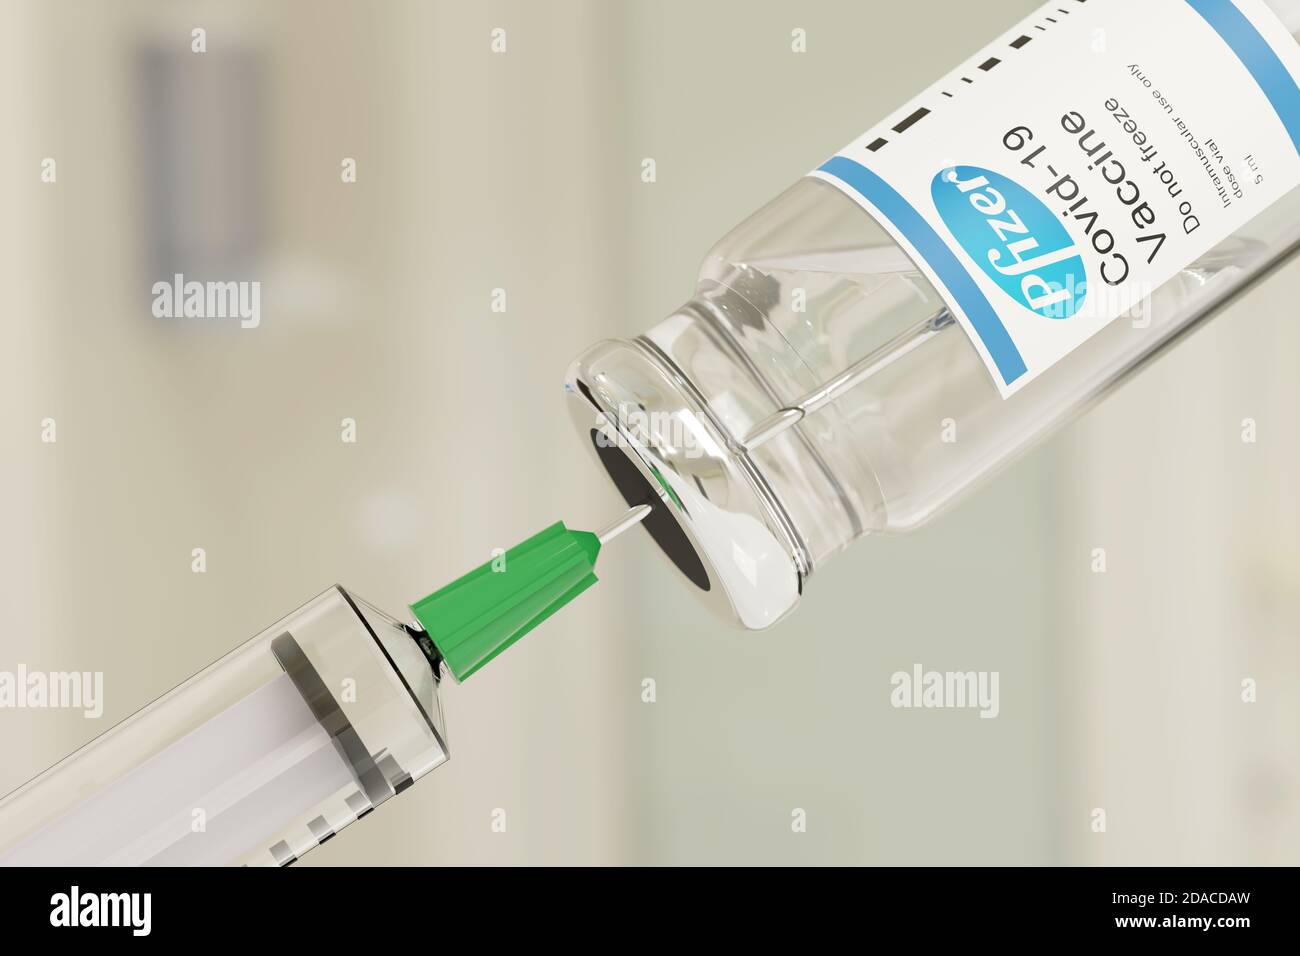 Buenos Aires, Argentina - November 11: Pfizer Covid -19 vaccine vial and injection syringe isolated on white background. 3d illustration. Stock Photo